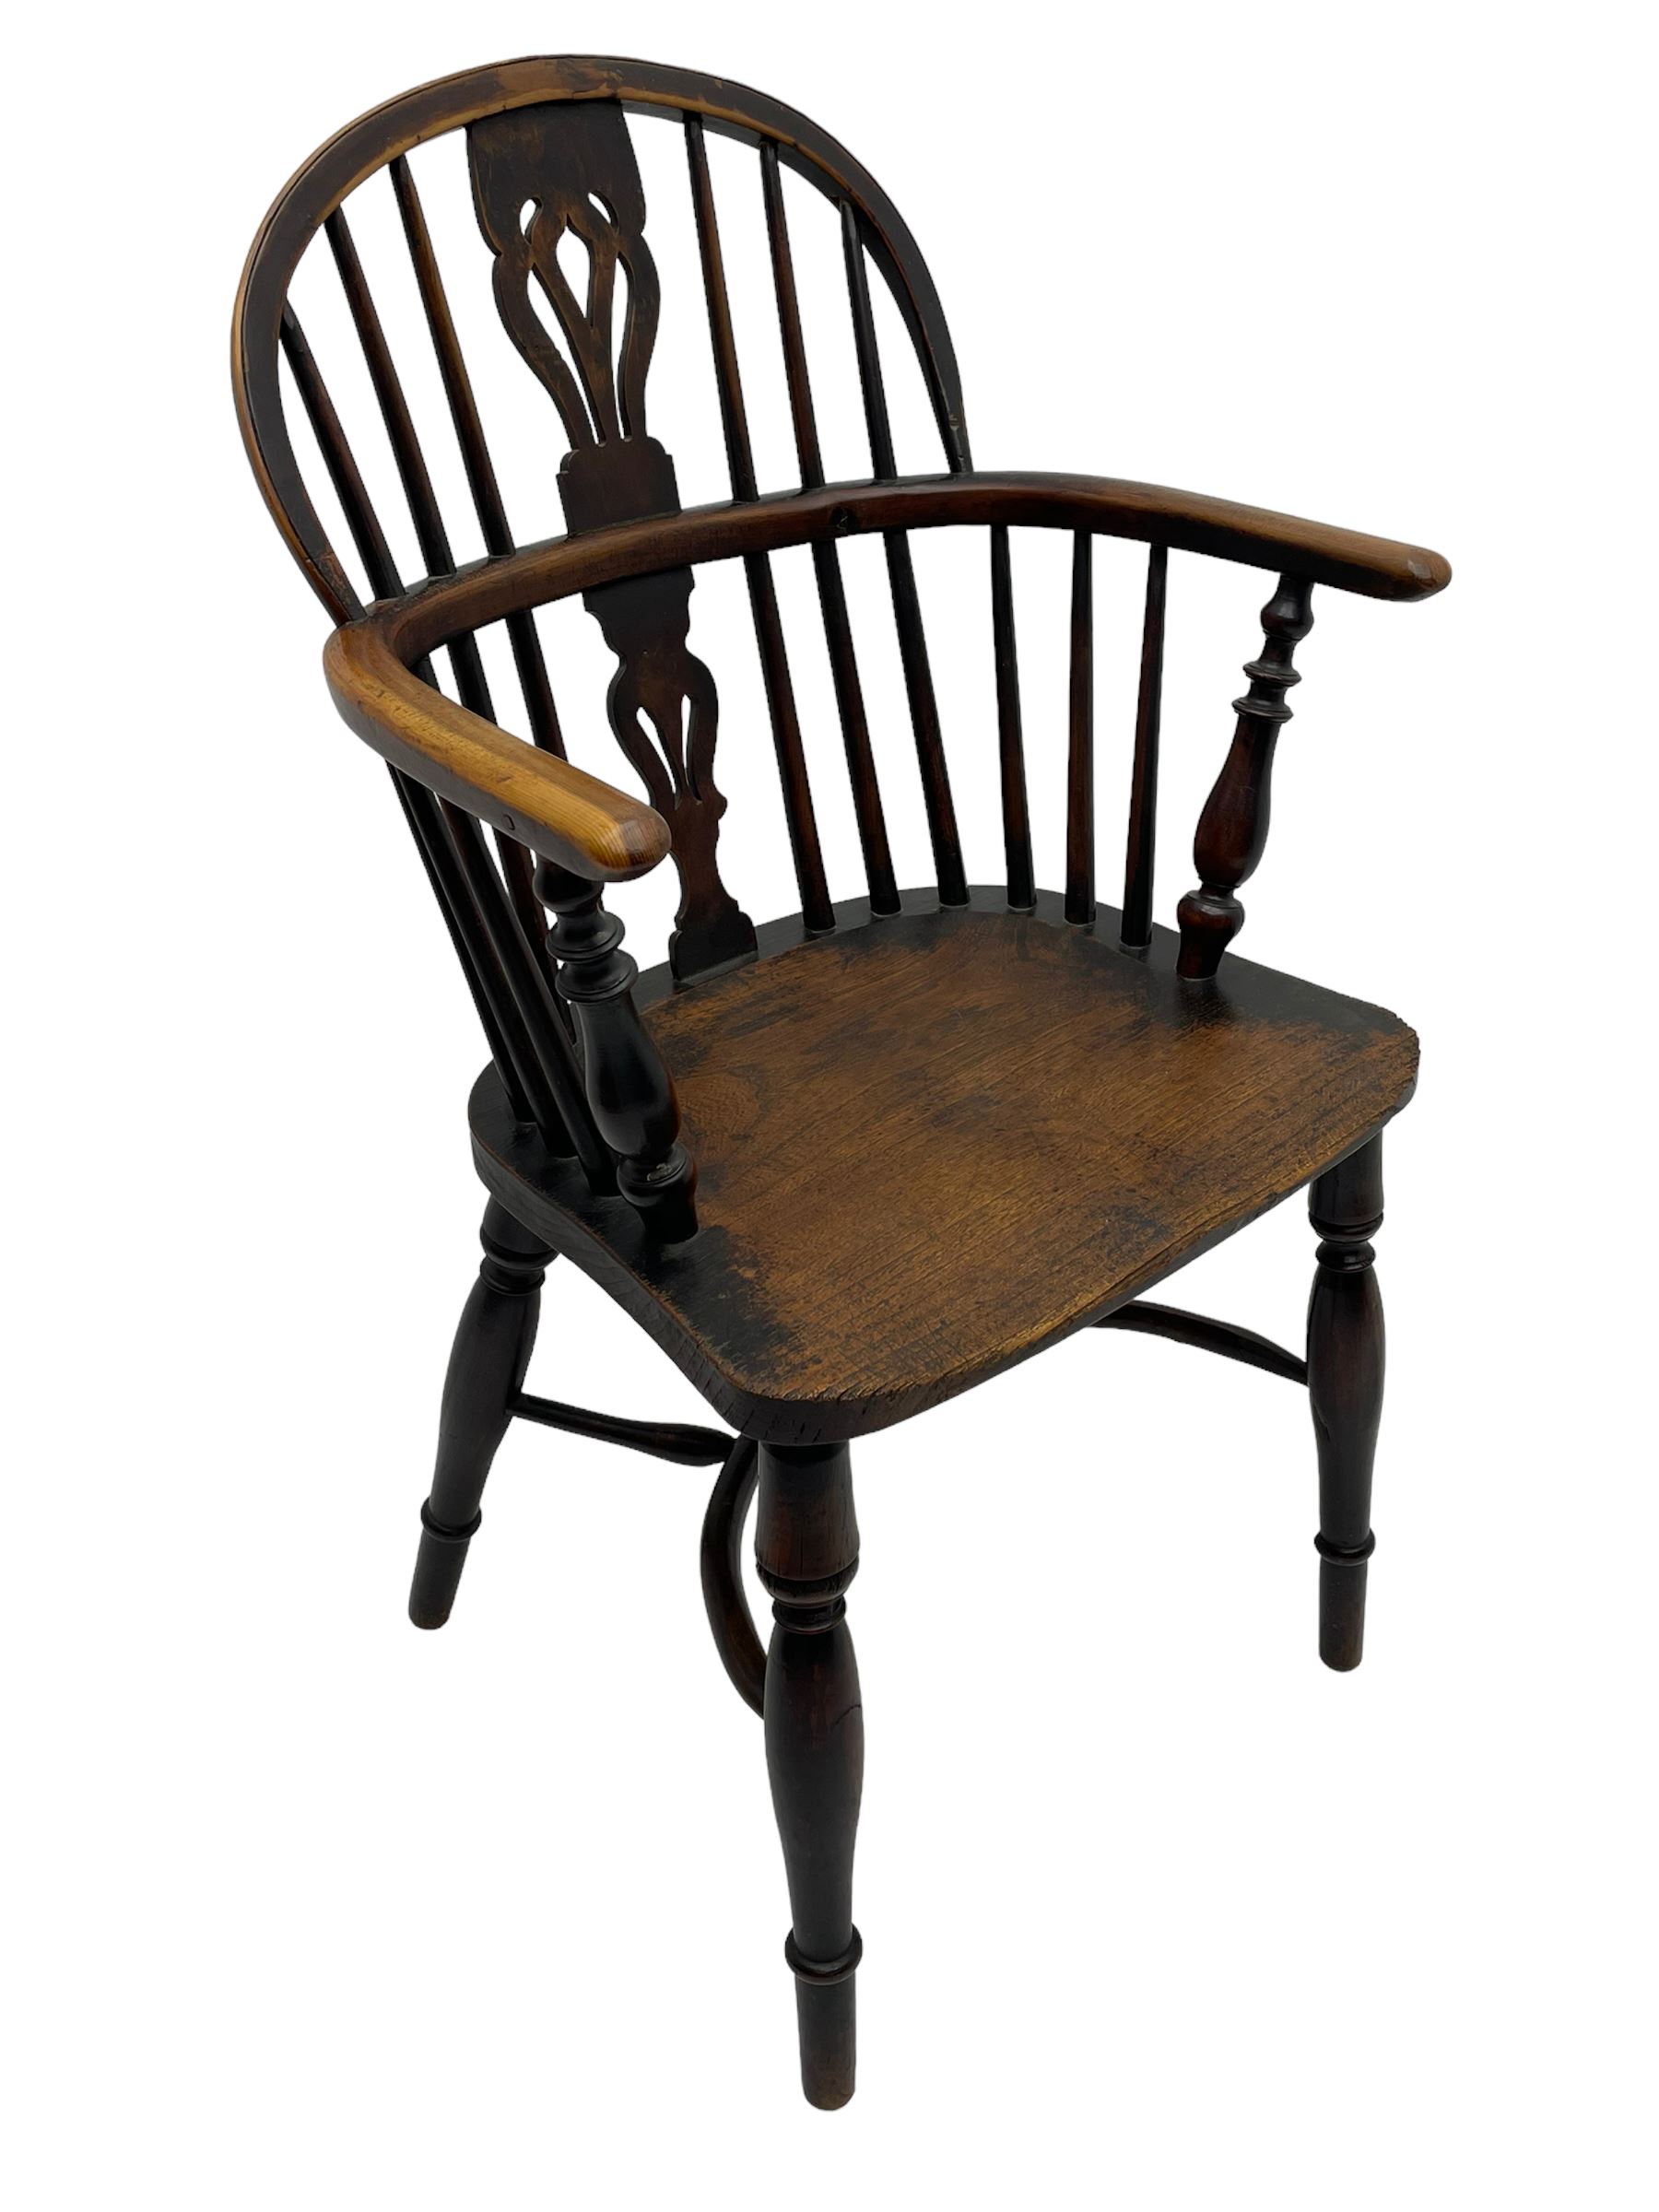 19th century yew wood and elm Windsor chair - Image 5 of 9